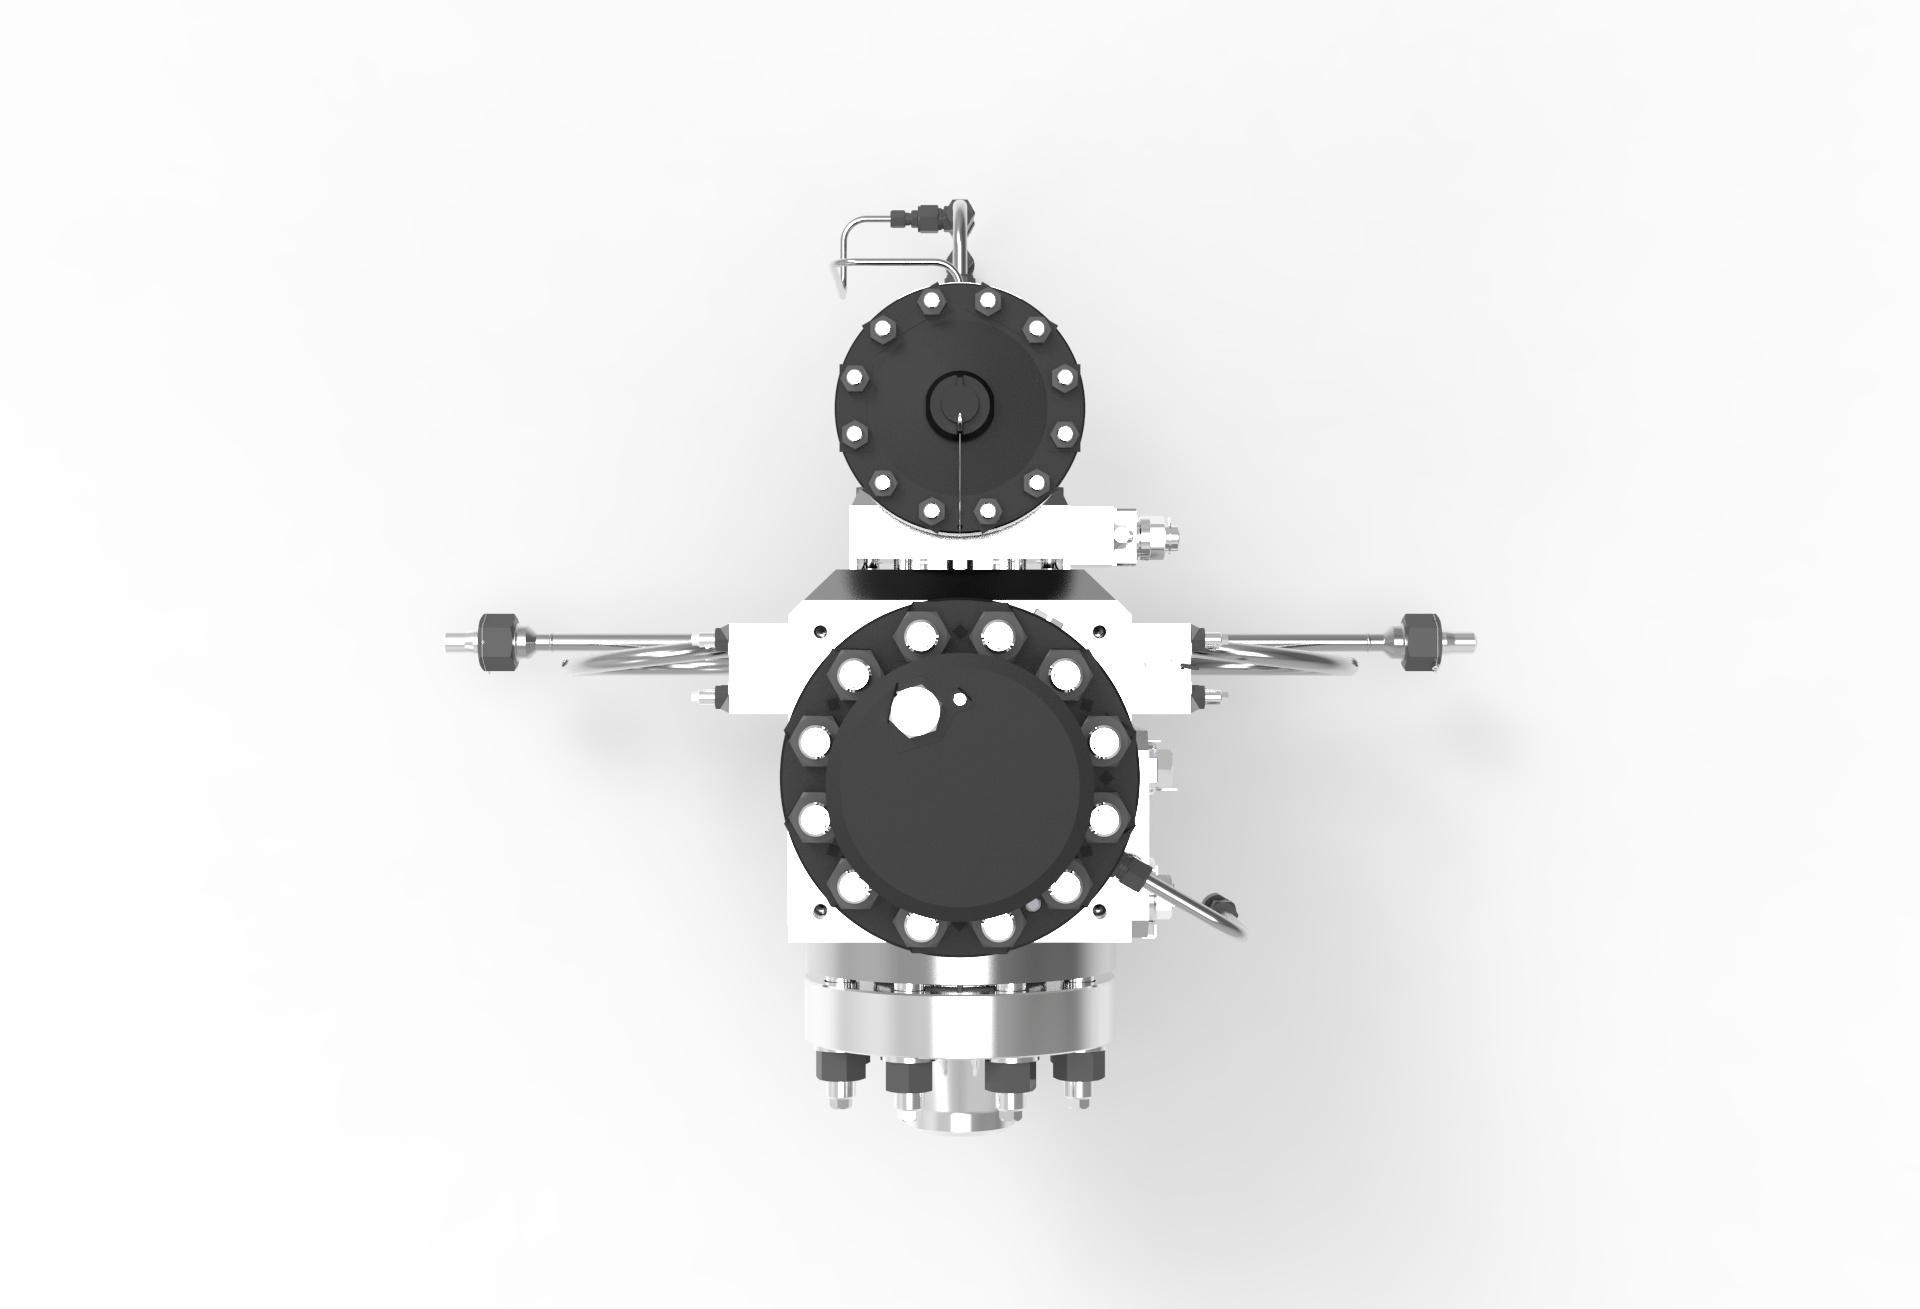 Top view of a SEBIM CSSV 3000 Compact Single Safety Valve manufactured by Trillium Flow Technologies